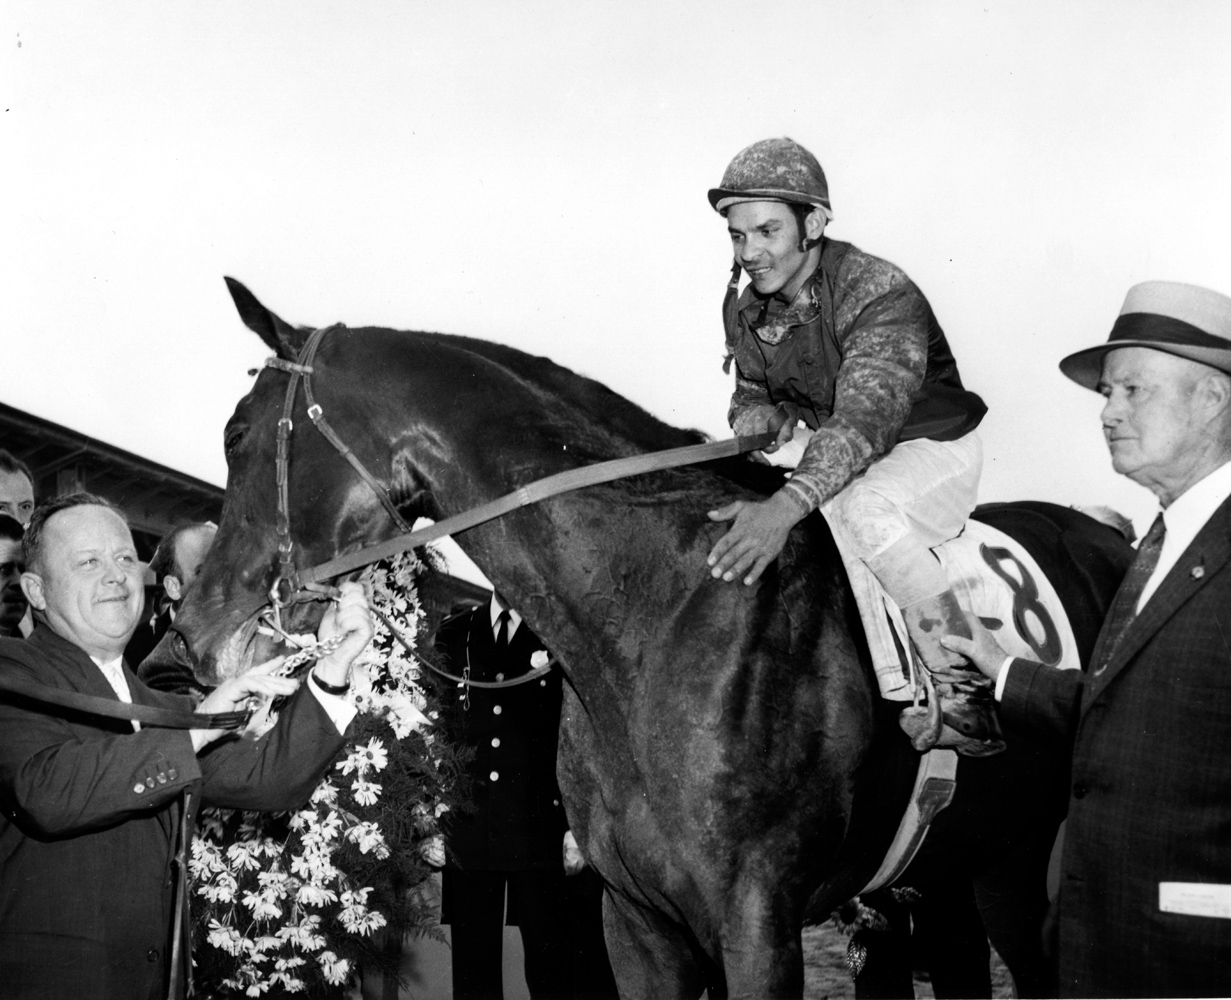 Milo Valenzuela, Tim Tam, H. A. "Jimmy Jones, and Ben Jones after their 1958 Preakness Stakes victory (Pimlico Photo/Museum Collection)